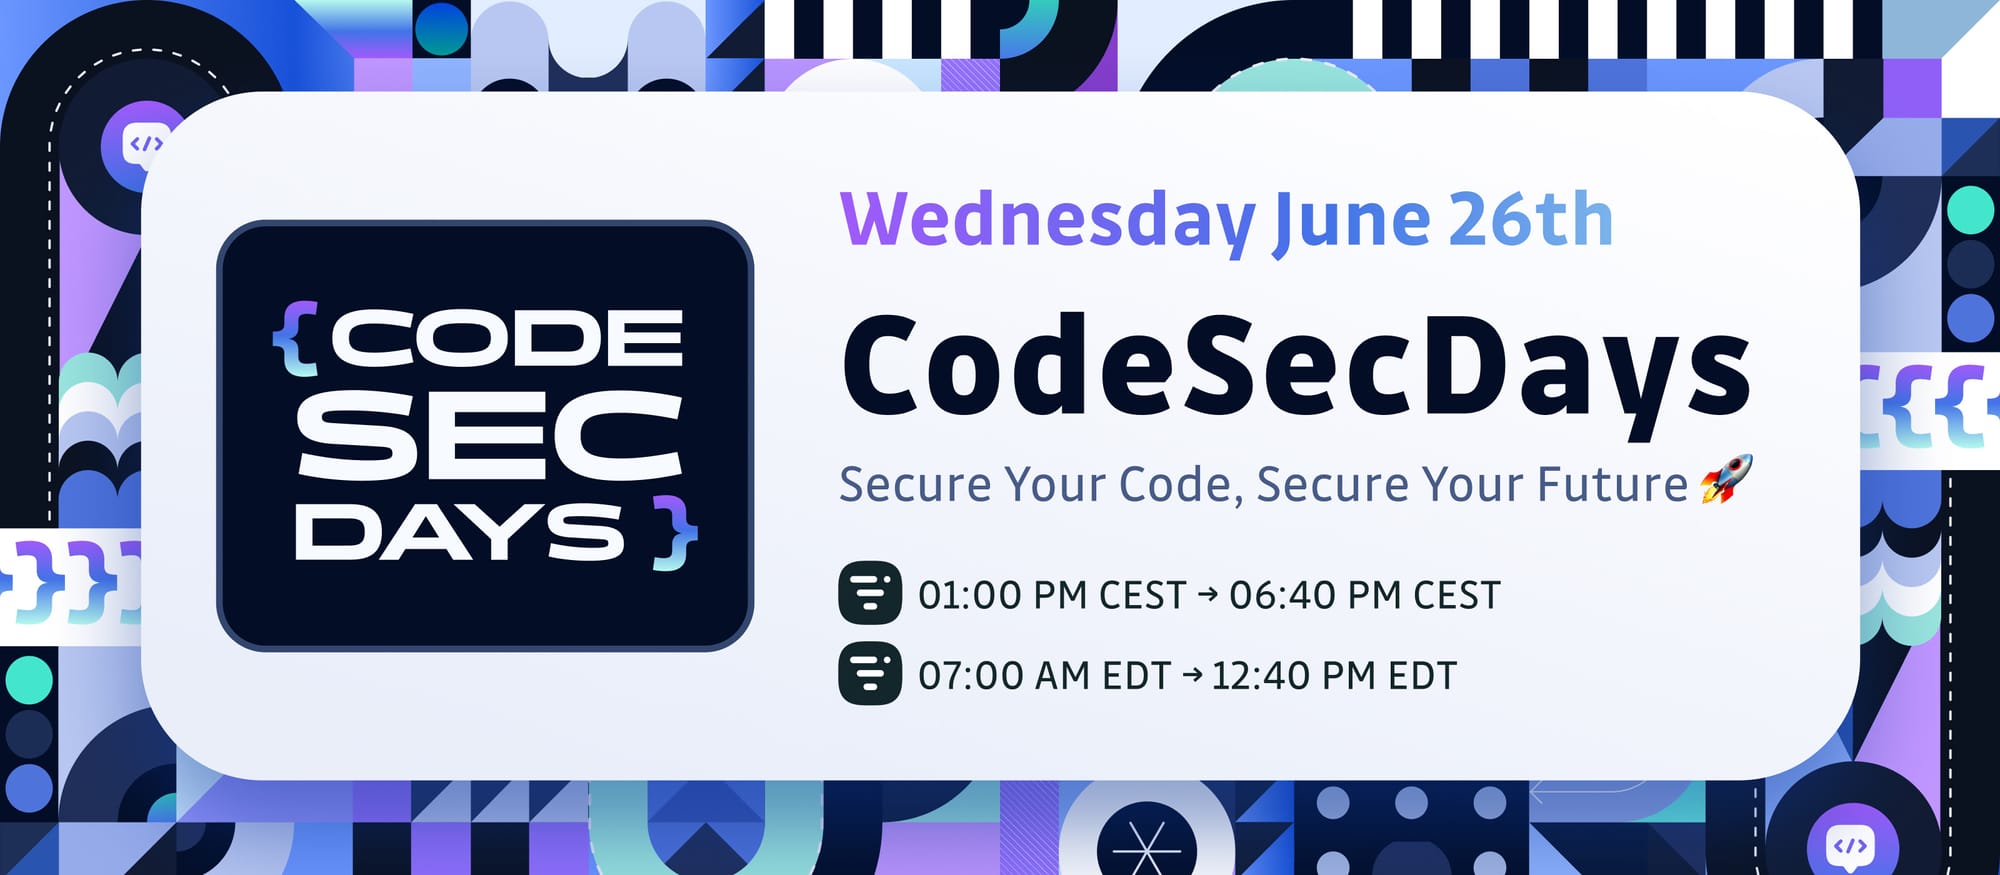 CodeSecDays: Insights and Highlights from GitGuardian's Security Event